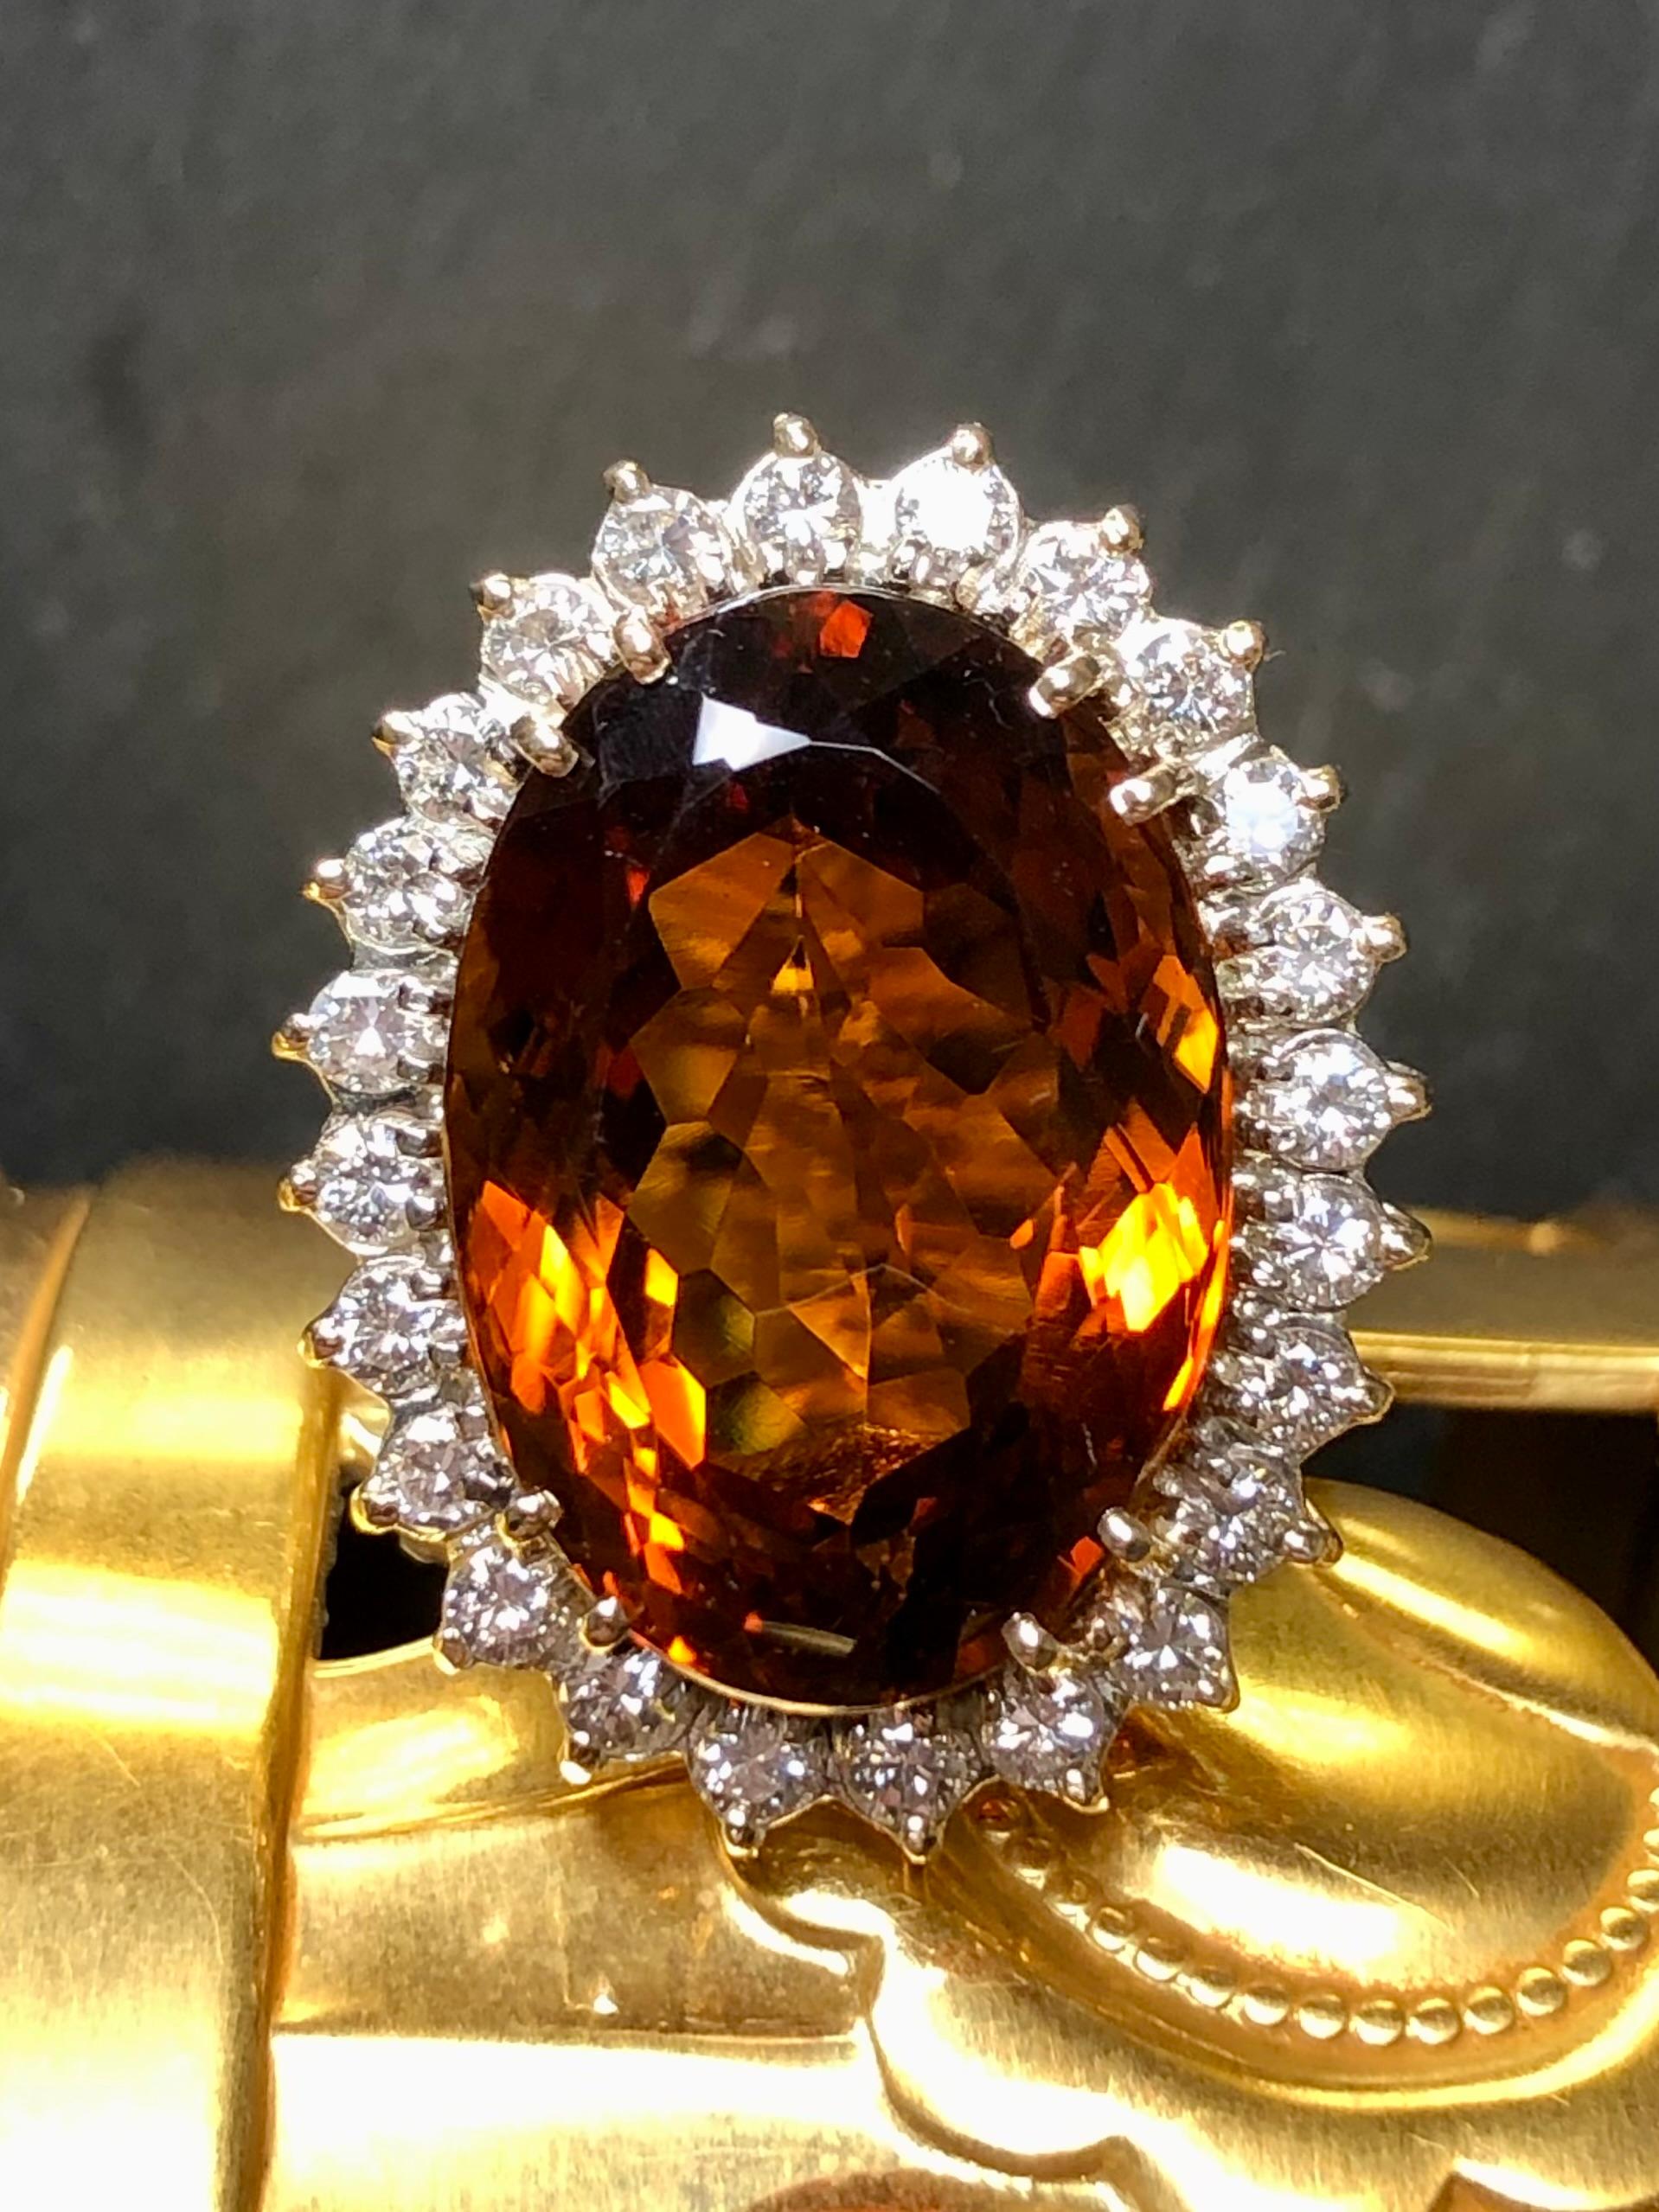 
A stunning cocktail ring c. the 1960’s hand crafted in 14K yellow gold and centered by an absolutely gorgeous Madeira citrine with an approximate weight of 18.60ct. Surrounding the center is approximately 1.20cttw in G-H color Vs1-2 clarity round